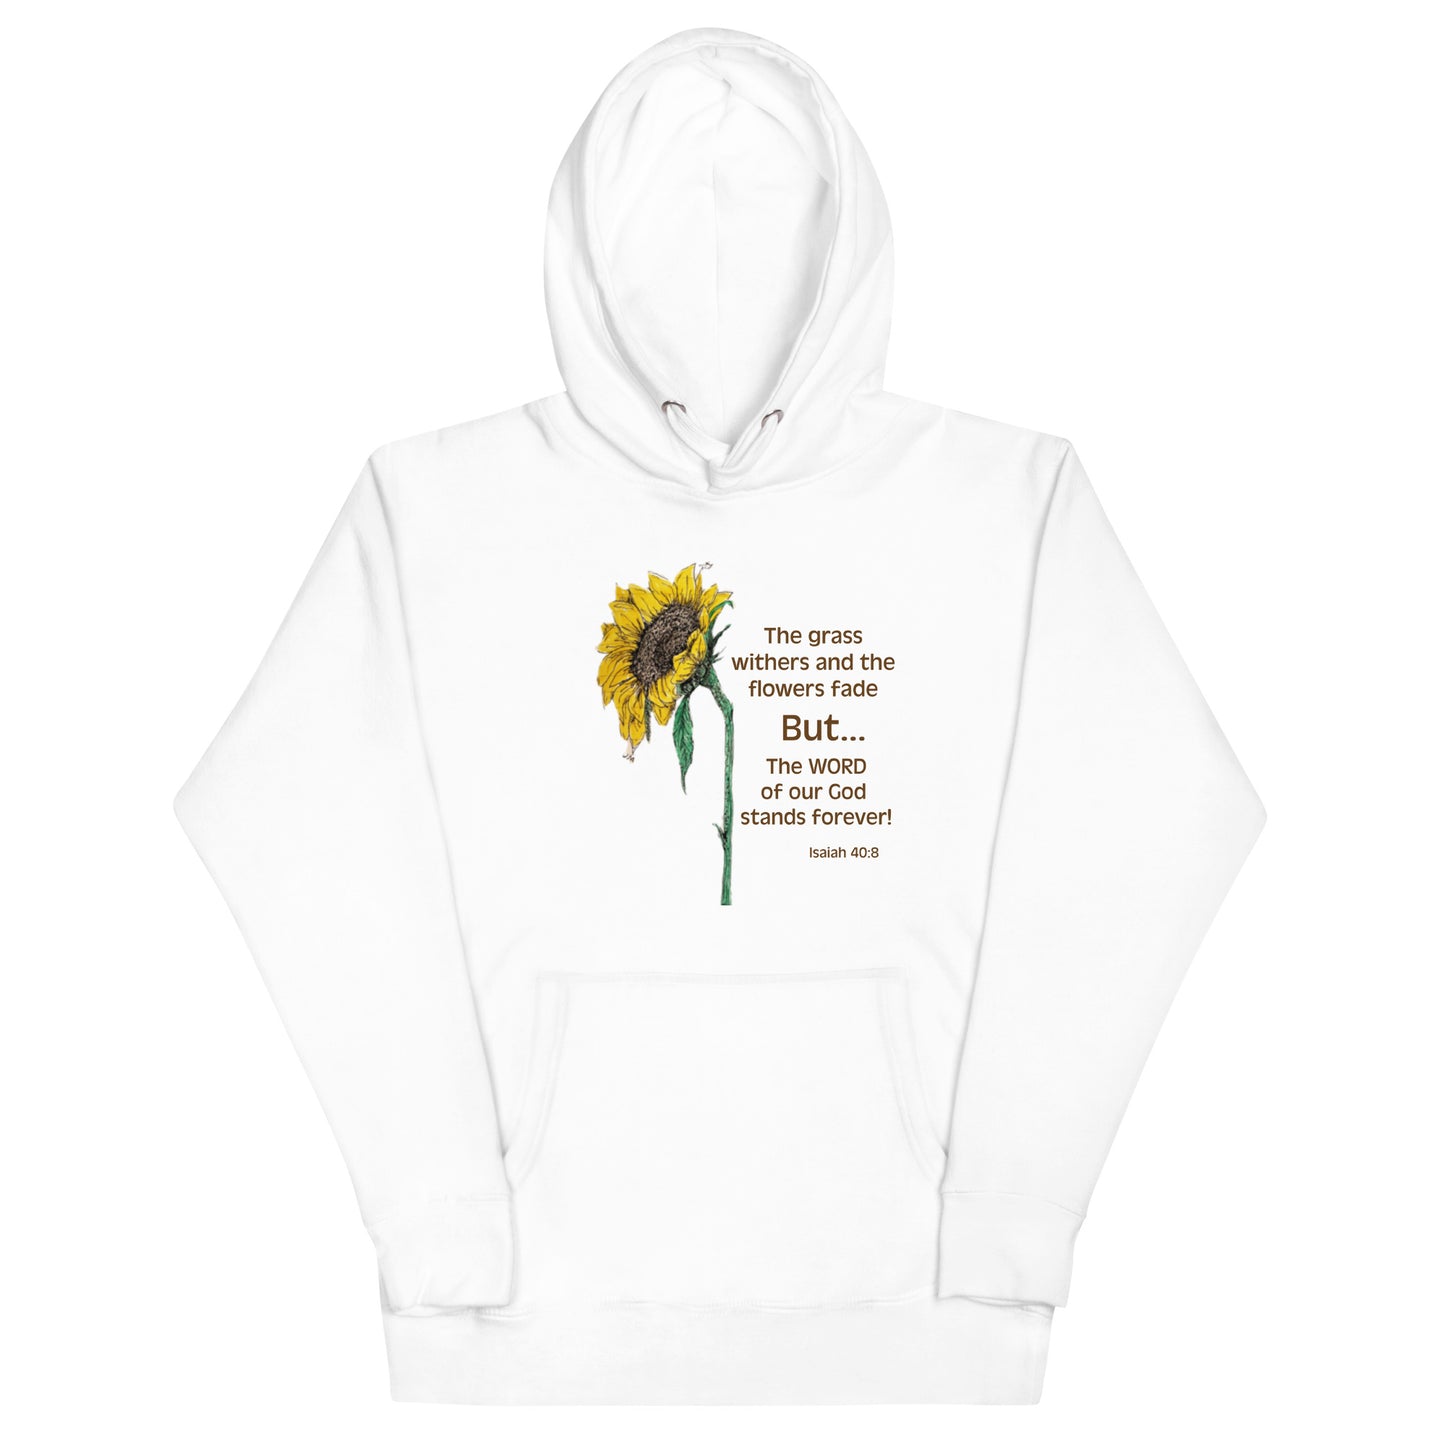 God Said - "The Word of Our God Stands Forever" Unisex Hoodie